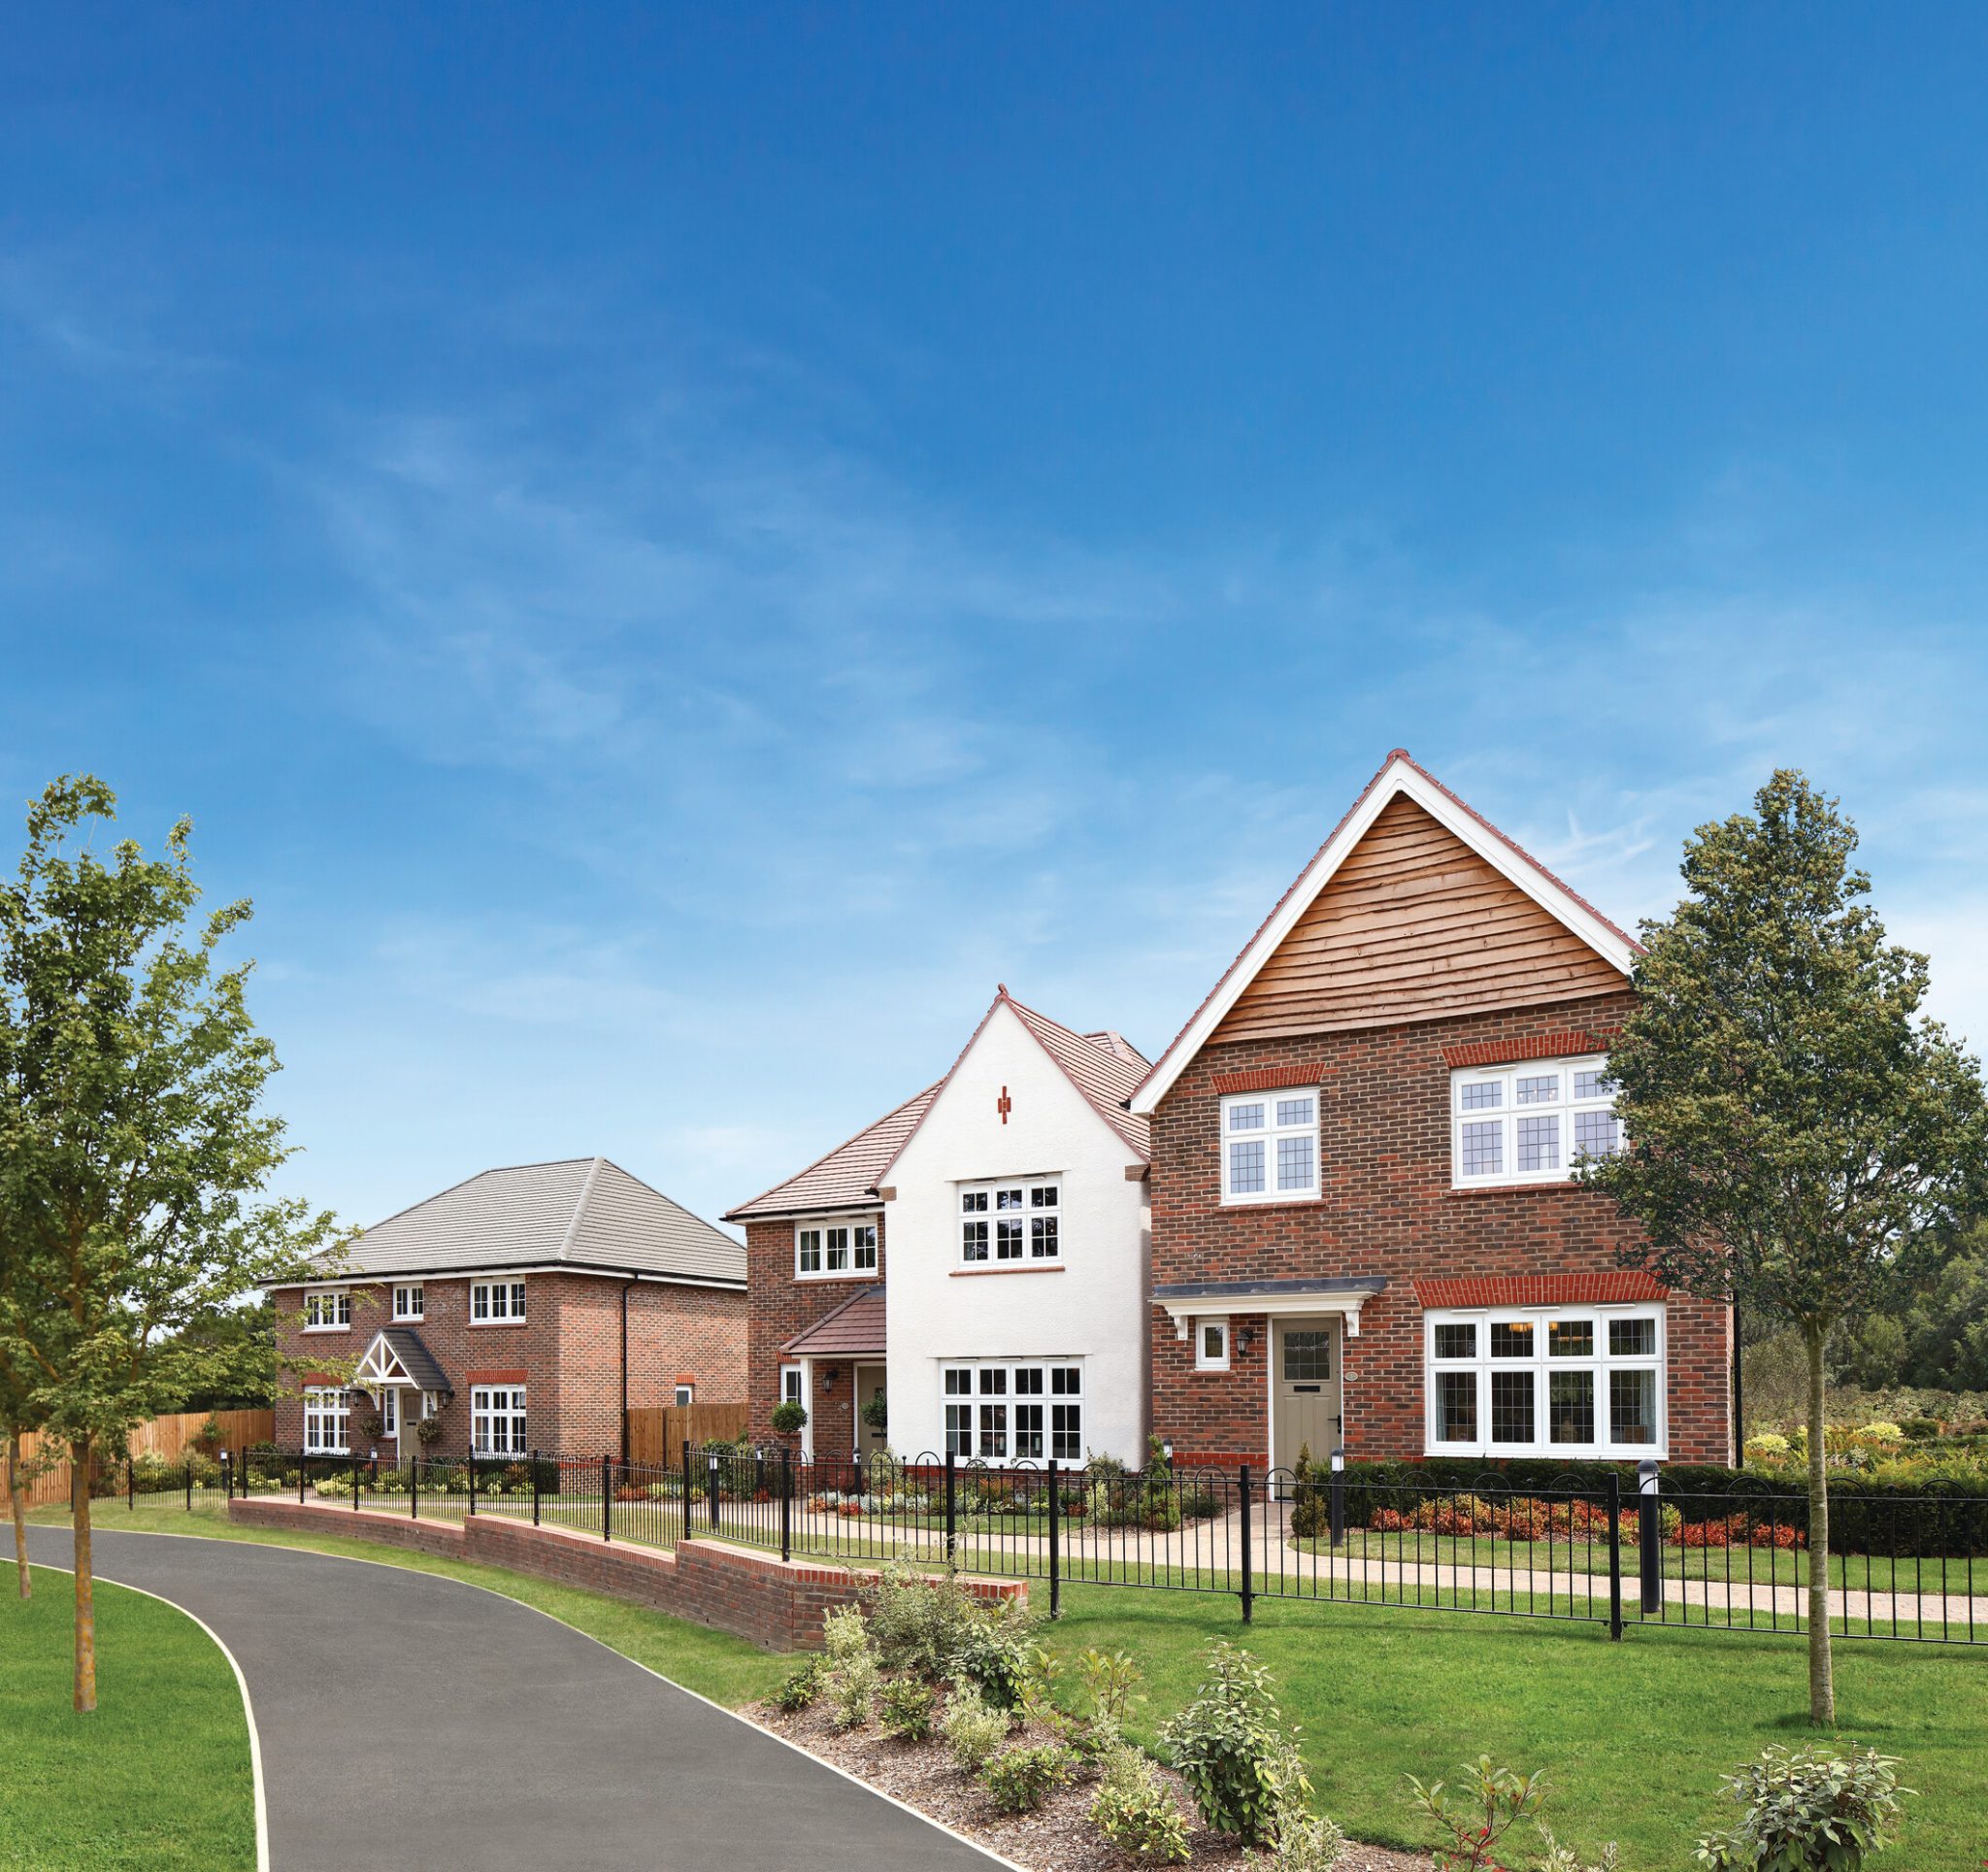 Redrow Homes East Midlands to bring over 200 homes to Hugglescote